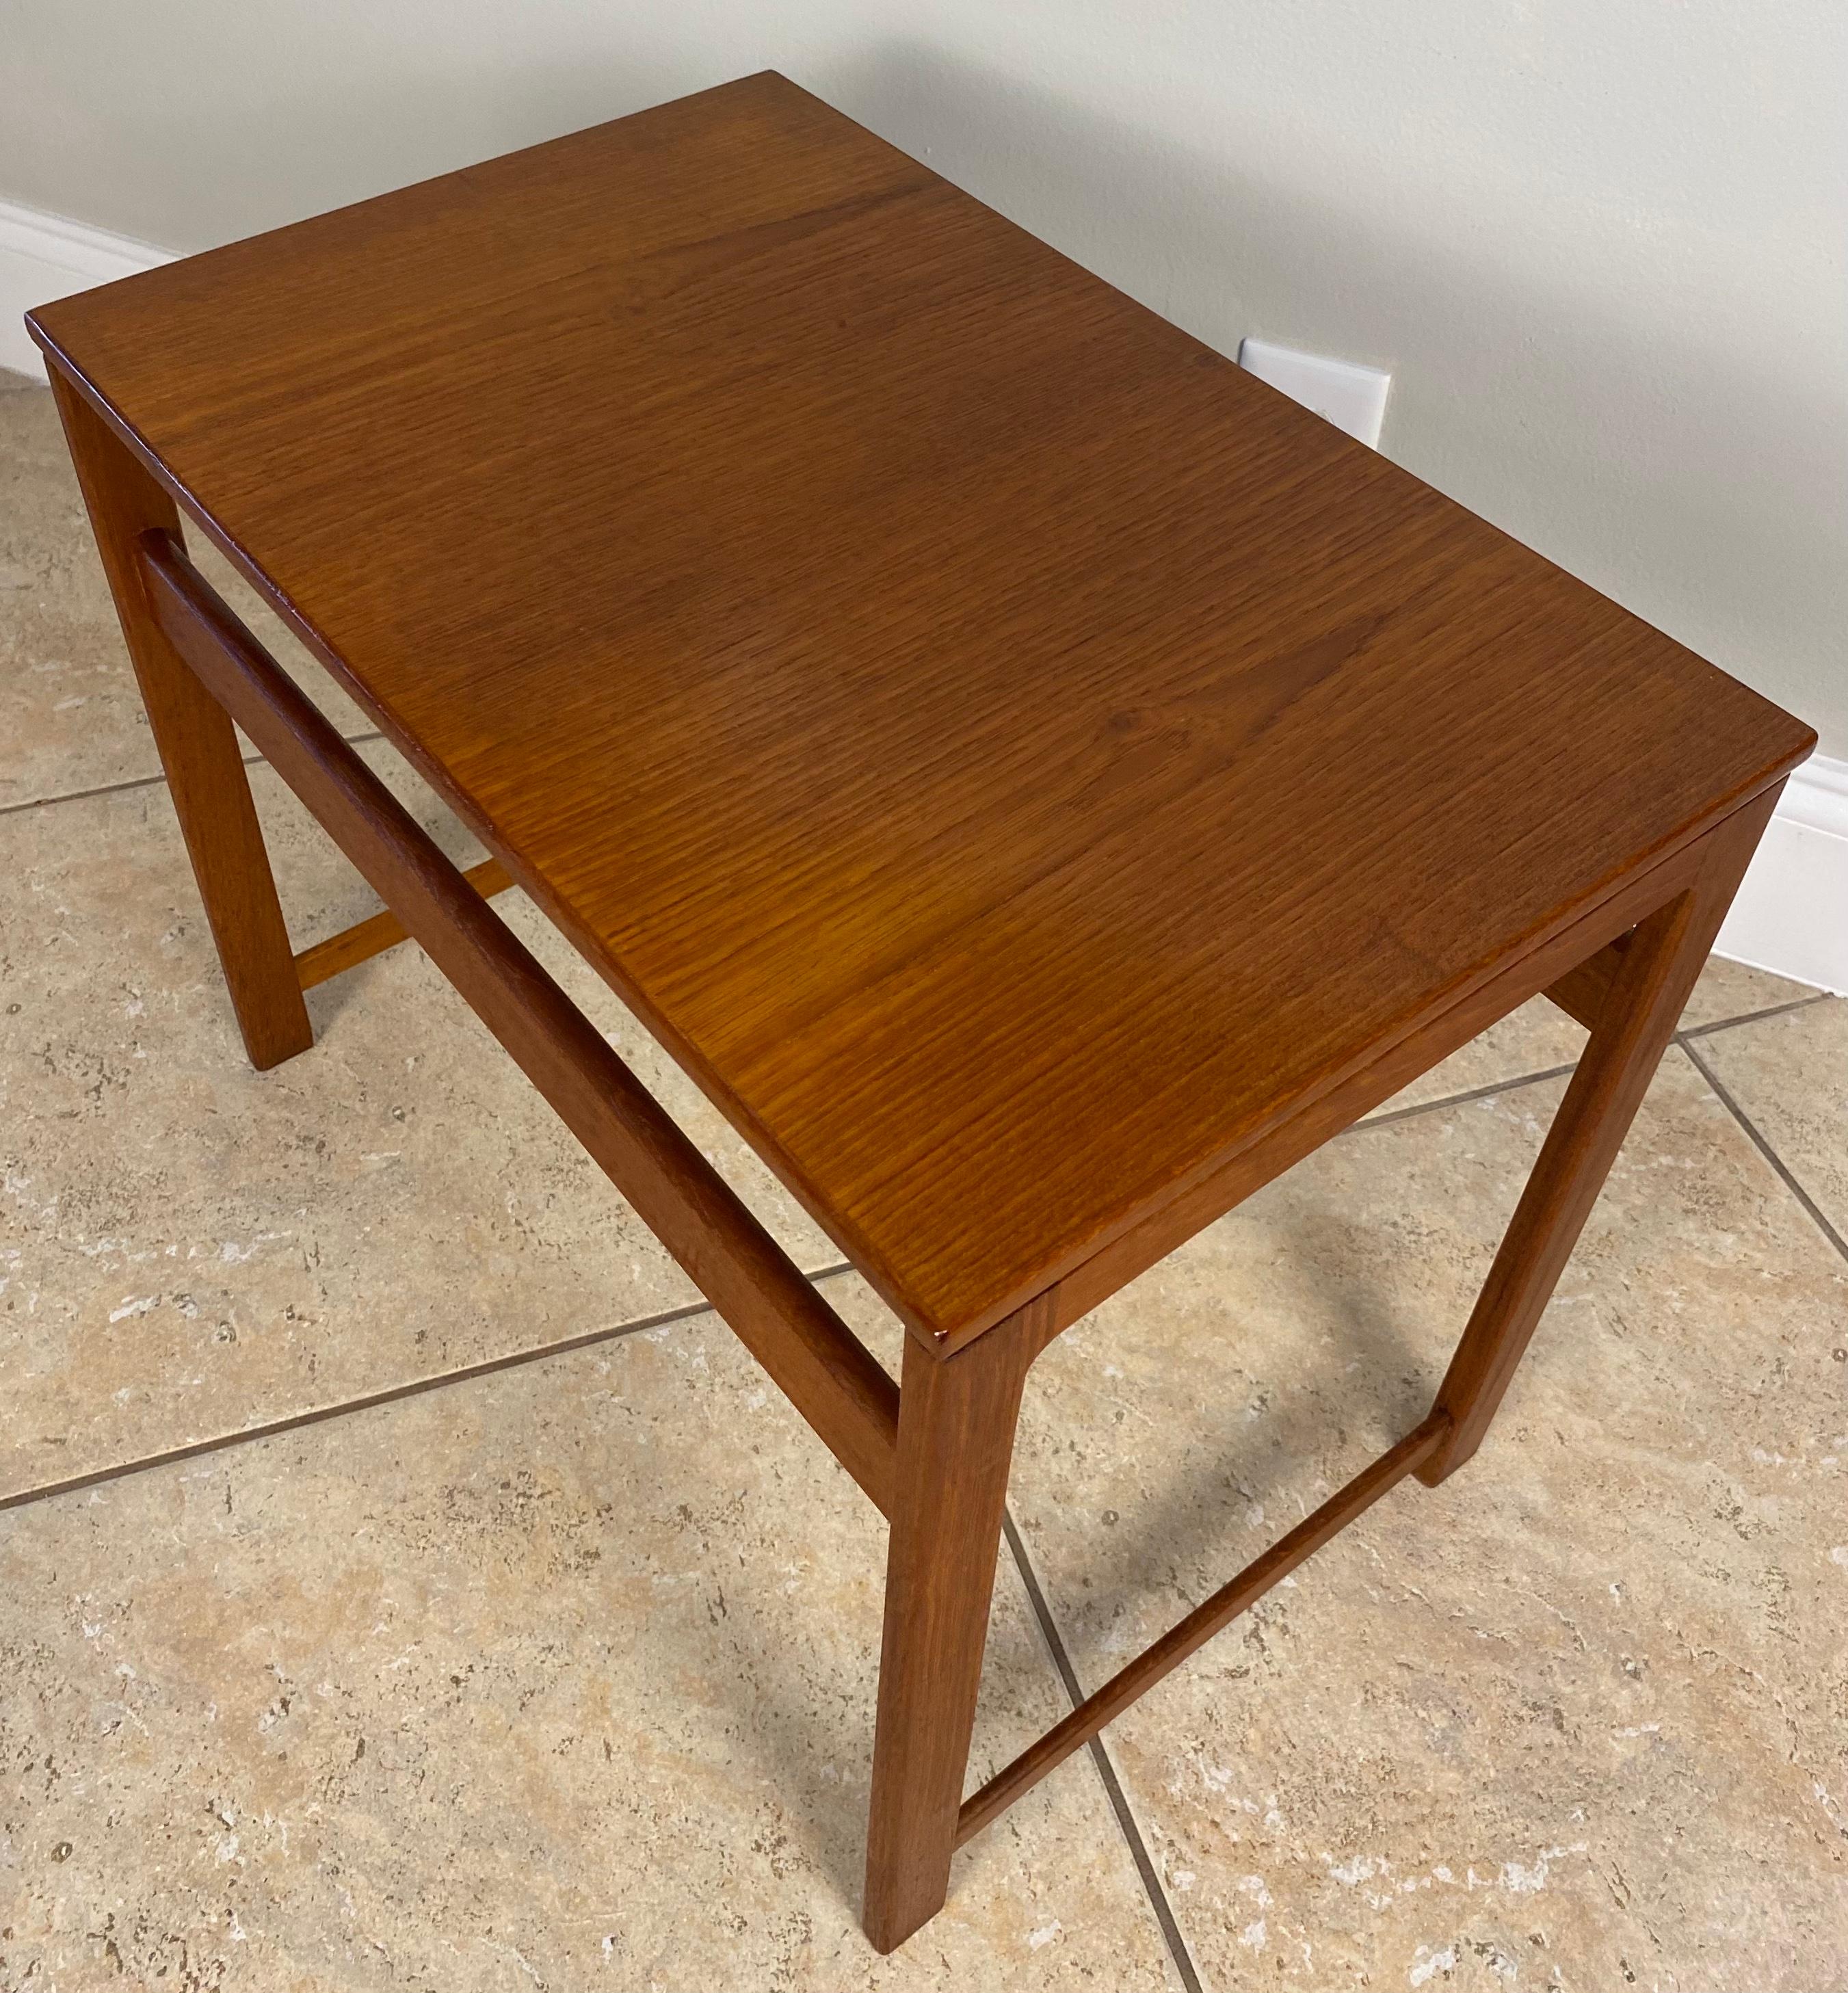 A very nice quality set of 3 French mid 20th century wooden nesting tables. Constructed in durable teak. Designed in a Scandinavian style, manner of Hans J. Wegner.  

These Hans Wegner style wooden nesting tables are of very good quality and would